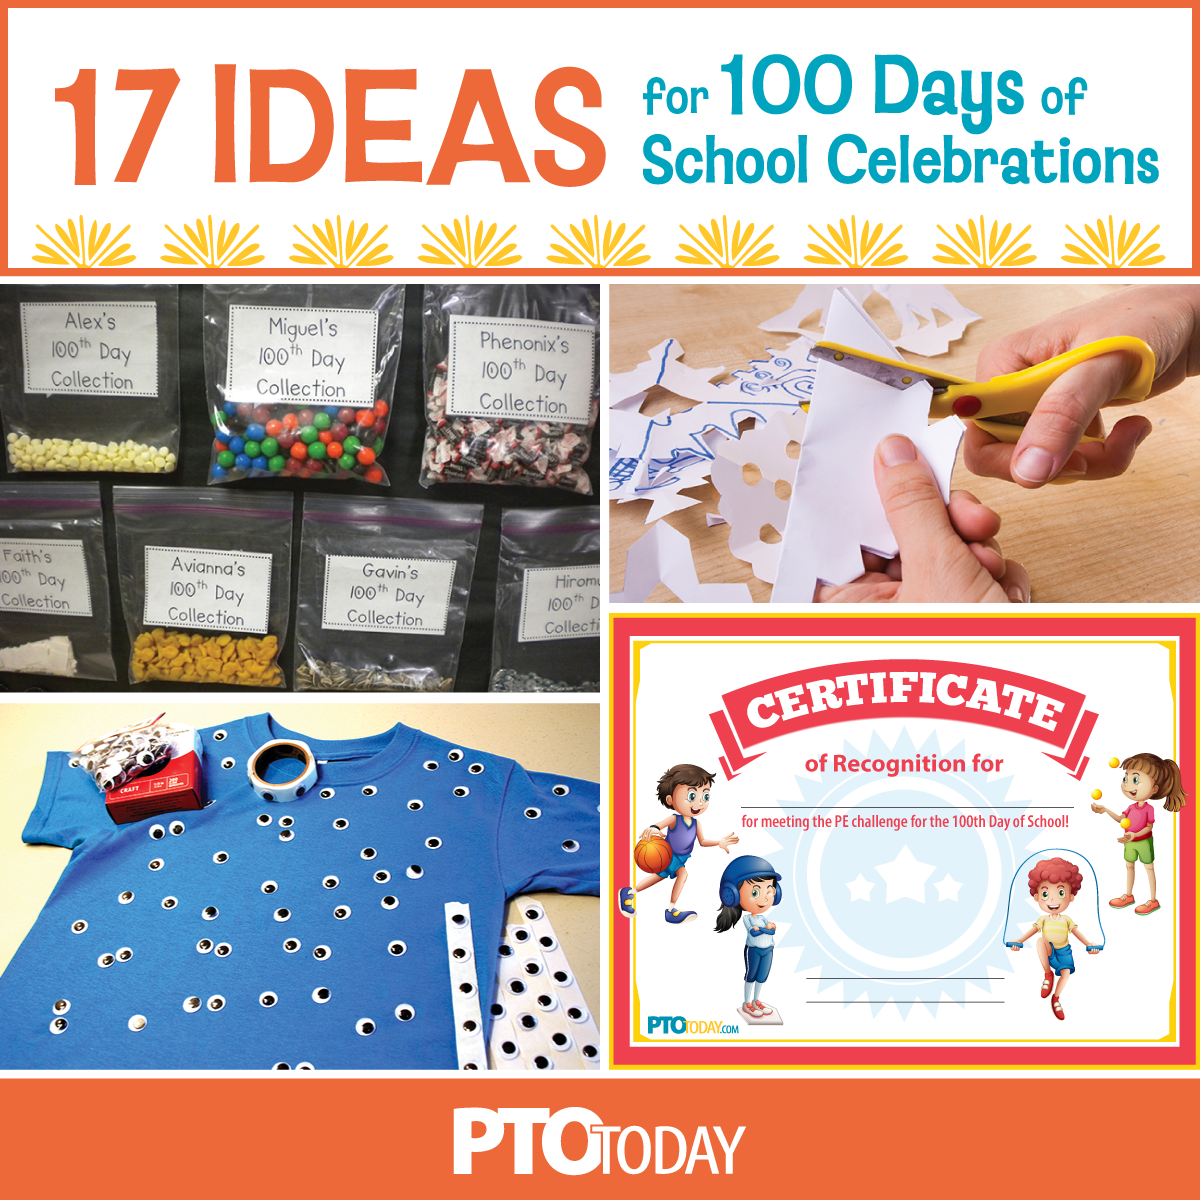 Celebrate 100 days of school - pin this article